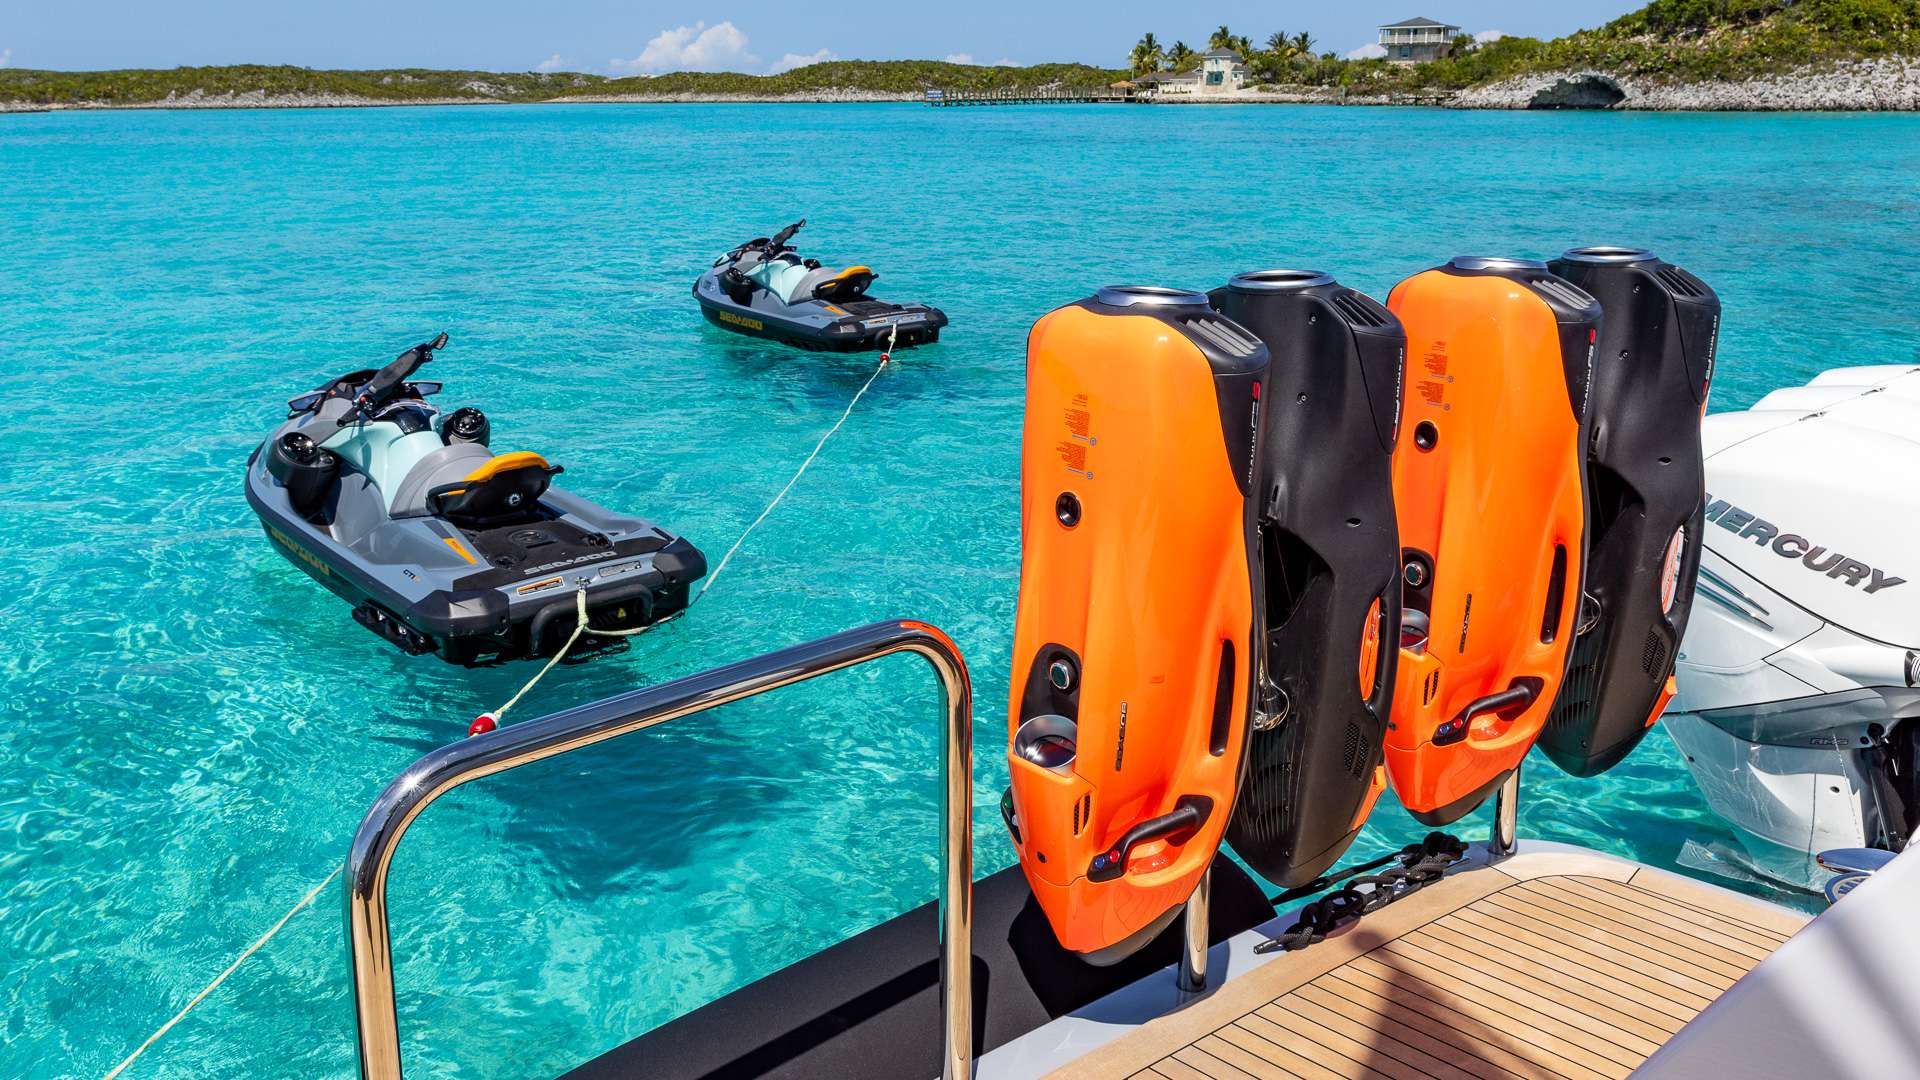 NO SHORTCUTS Yacht Charter - 4 Seabobs and 2 Jet Skis